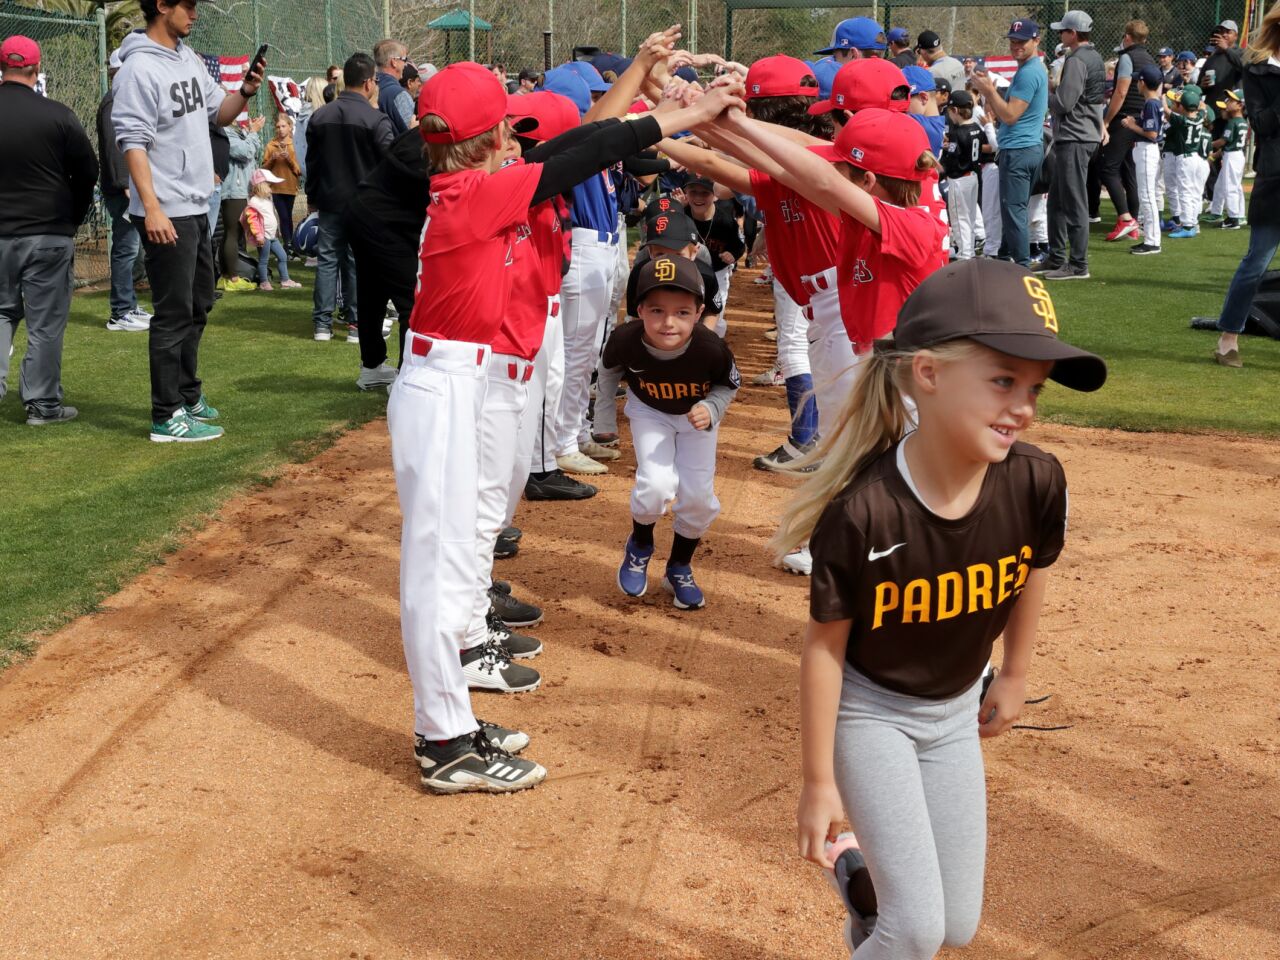 RSFLL players form a tunnel to welcome the newest T-Ball players